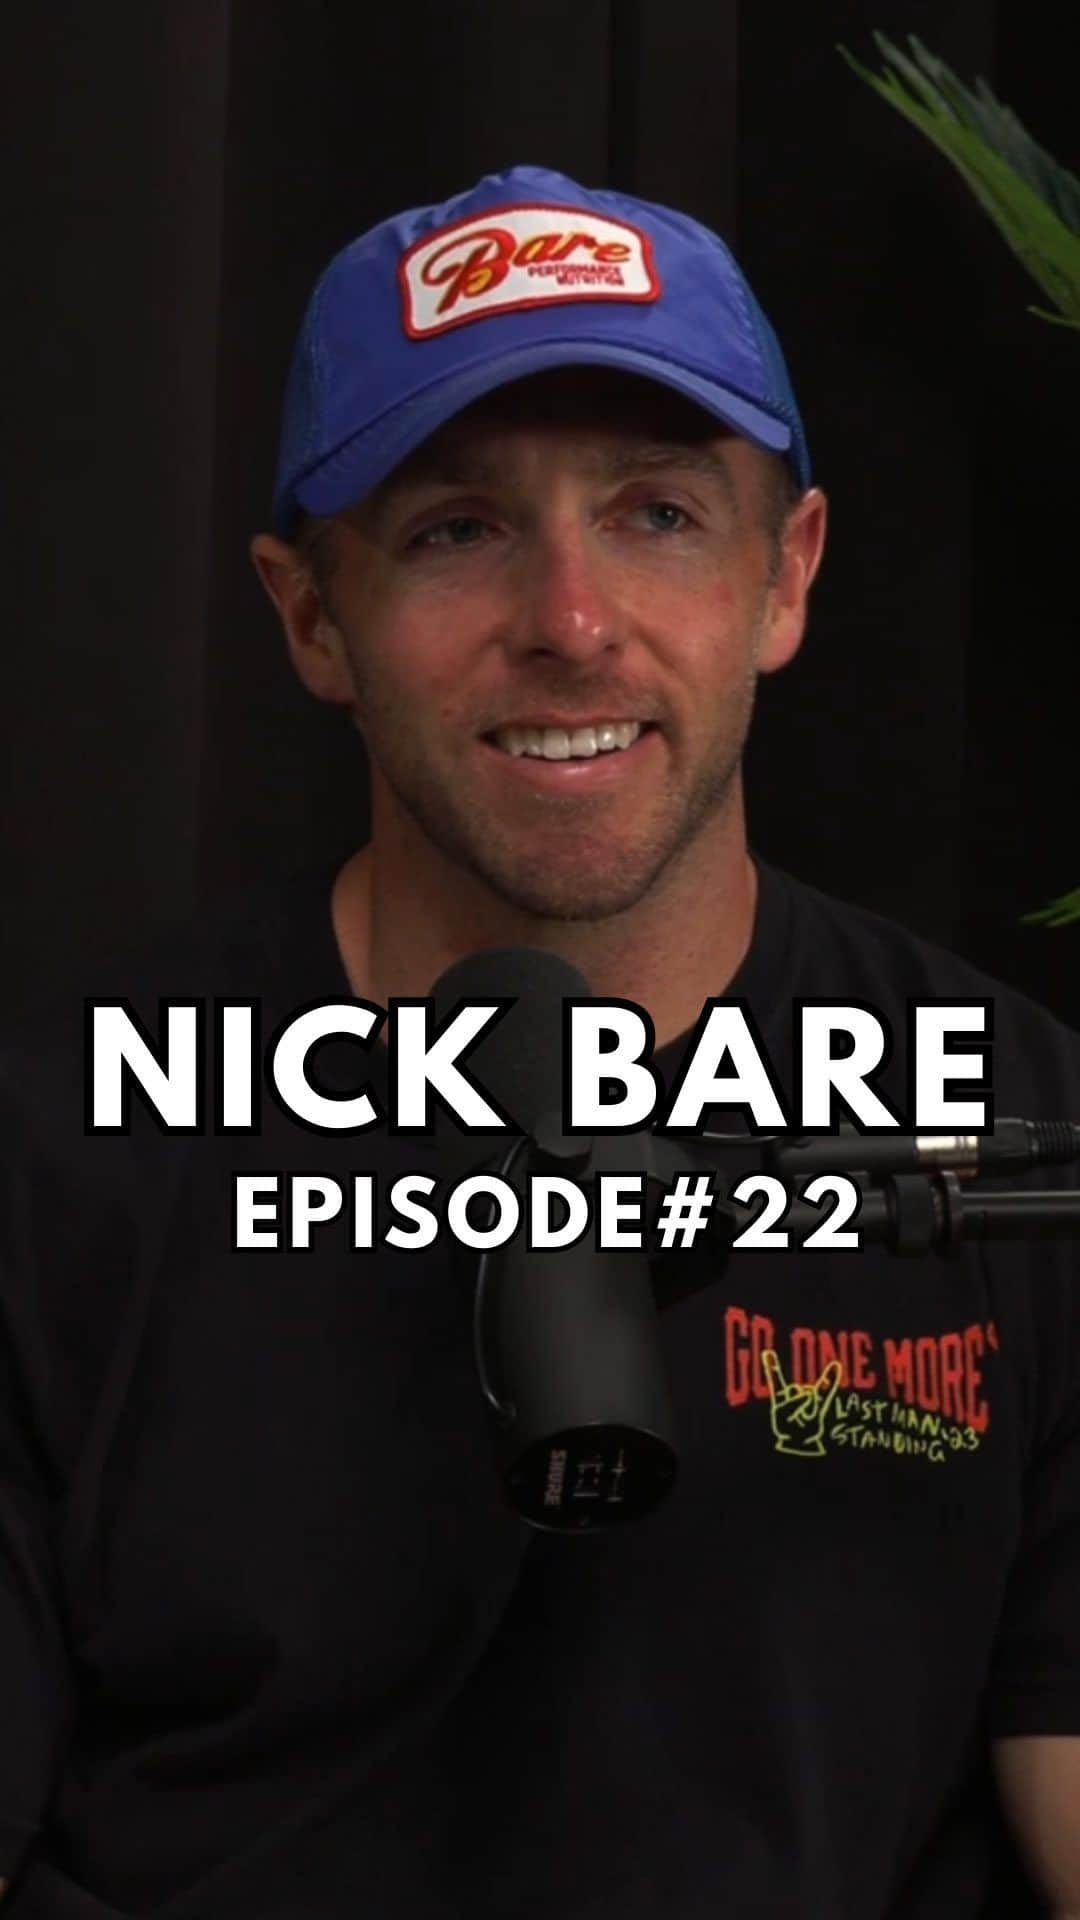 ショーン・ブースのインスタグラム：「In episode #22 of @inthebooth.podcast Shawn has a conversation with Nick Bare (@nickbarefitness), the founder of BPN supplements. Nick’s journey began with a small loan, and he started building his supplement company in his dorm room over a decade ago. He is not only a successful entrepreneur but also a motivational hybrid athlete, a US Army veteran, and has created a massive online community. Recently, he reached 1 million subscribers on YouTube by inspiring others through his own accomplishments of challenging goals.  During the episode, Nick shares his experience participating in a grueling “last man standing” backyard ultra marathon, where he pushed himself to run an incredible 100 miles. He discusses the sources of his motivation and emphasizes the importance of allowing one’s life purpose to evolve and change. Nick encourages listeners to be open to foreclosing on identities they may have previously held and highlights the significance of having a North Star, a clear vision of where one wants to go in life.  He explains how his priorities in business have shifted due to the influence of family and why he decided to step down as CEO. Furthermore, Nick expresses his deep love for running, explaining that it provides him with much more than just a physical experience.  For beginners who struggle to start working out due to mental hurdles, Nick provides valuable advice and insights. He also distinguishes between being all in and being all consumed in various aspects of life. The episode covers topics such as disordered eating, habit stacking, and delves into the true meaning behind Nick’s motto “go one more”! #goonemore」